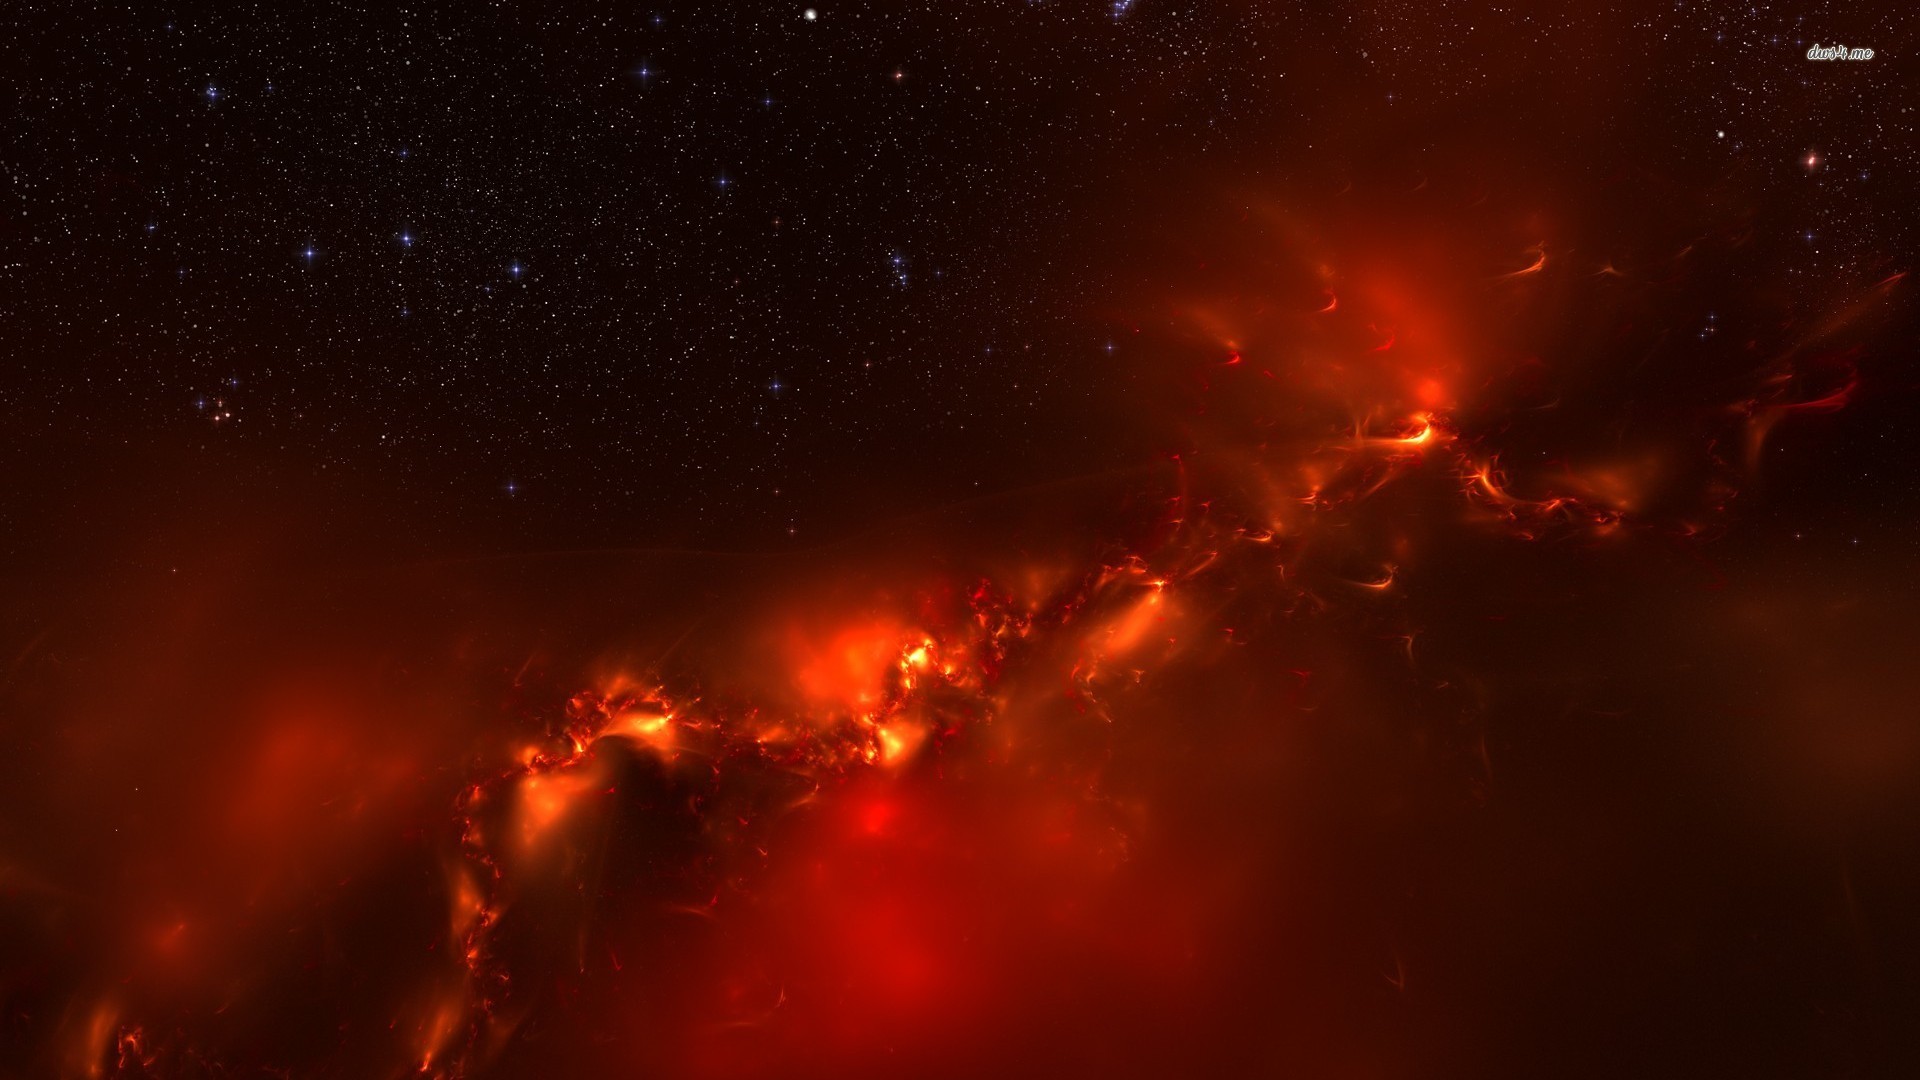 1920x1080 Red space wallpaper - Fantasy wallpapers - #8155